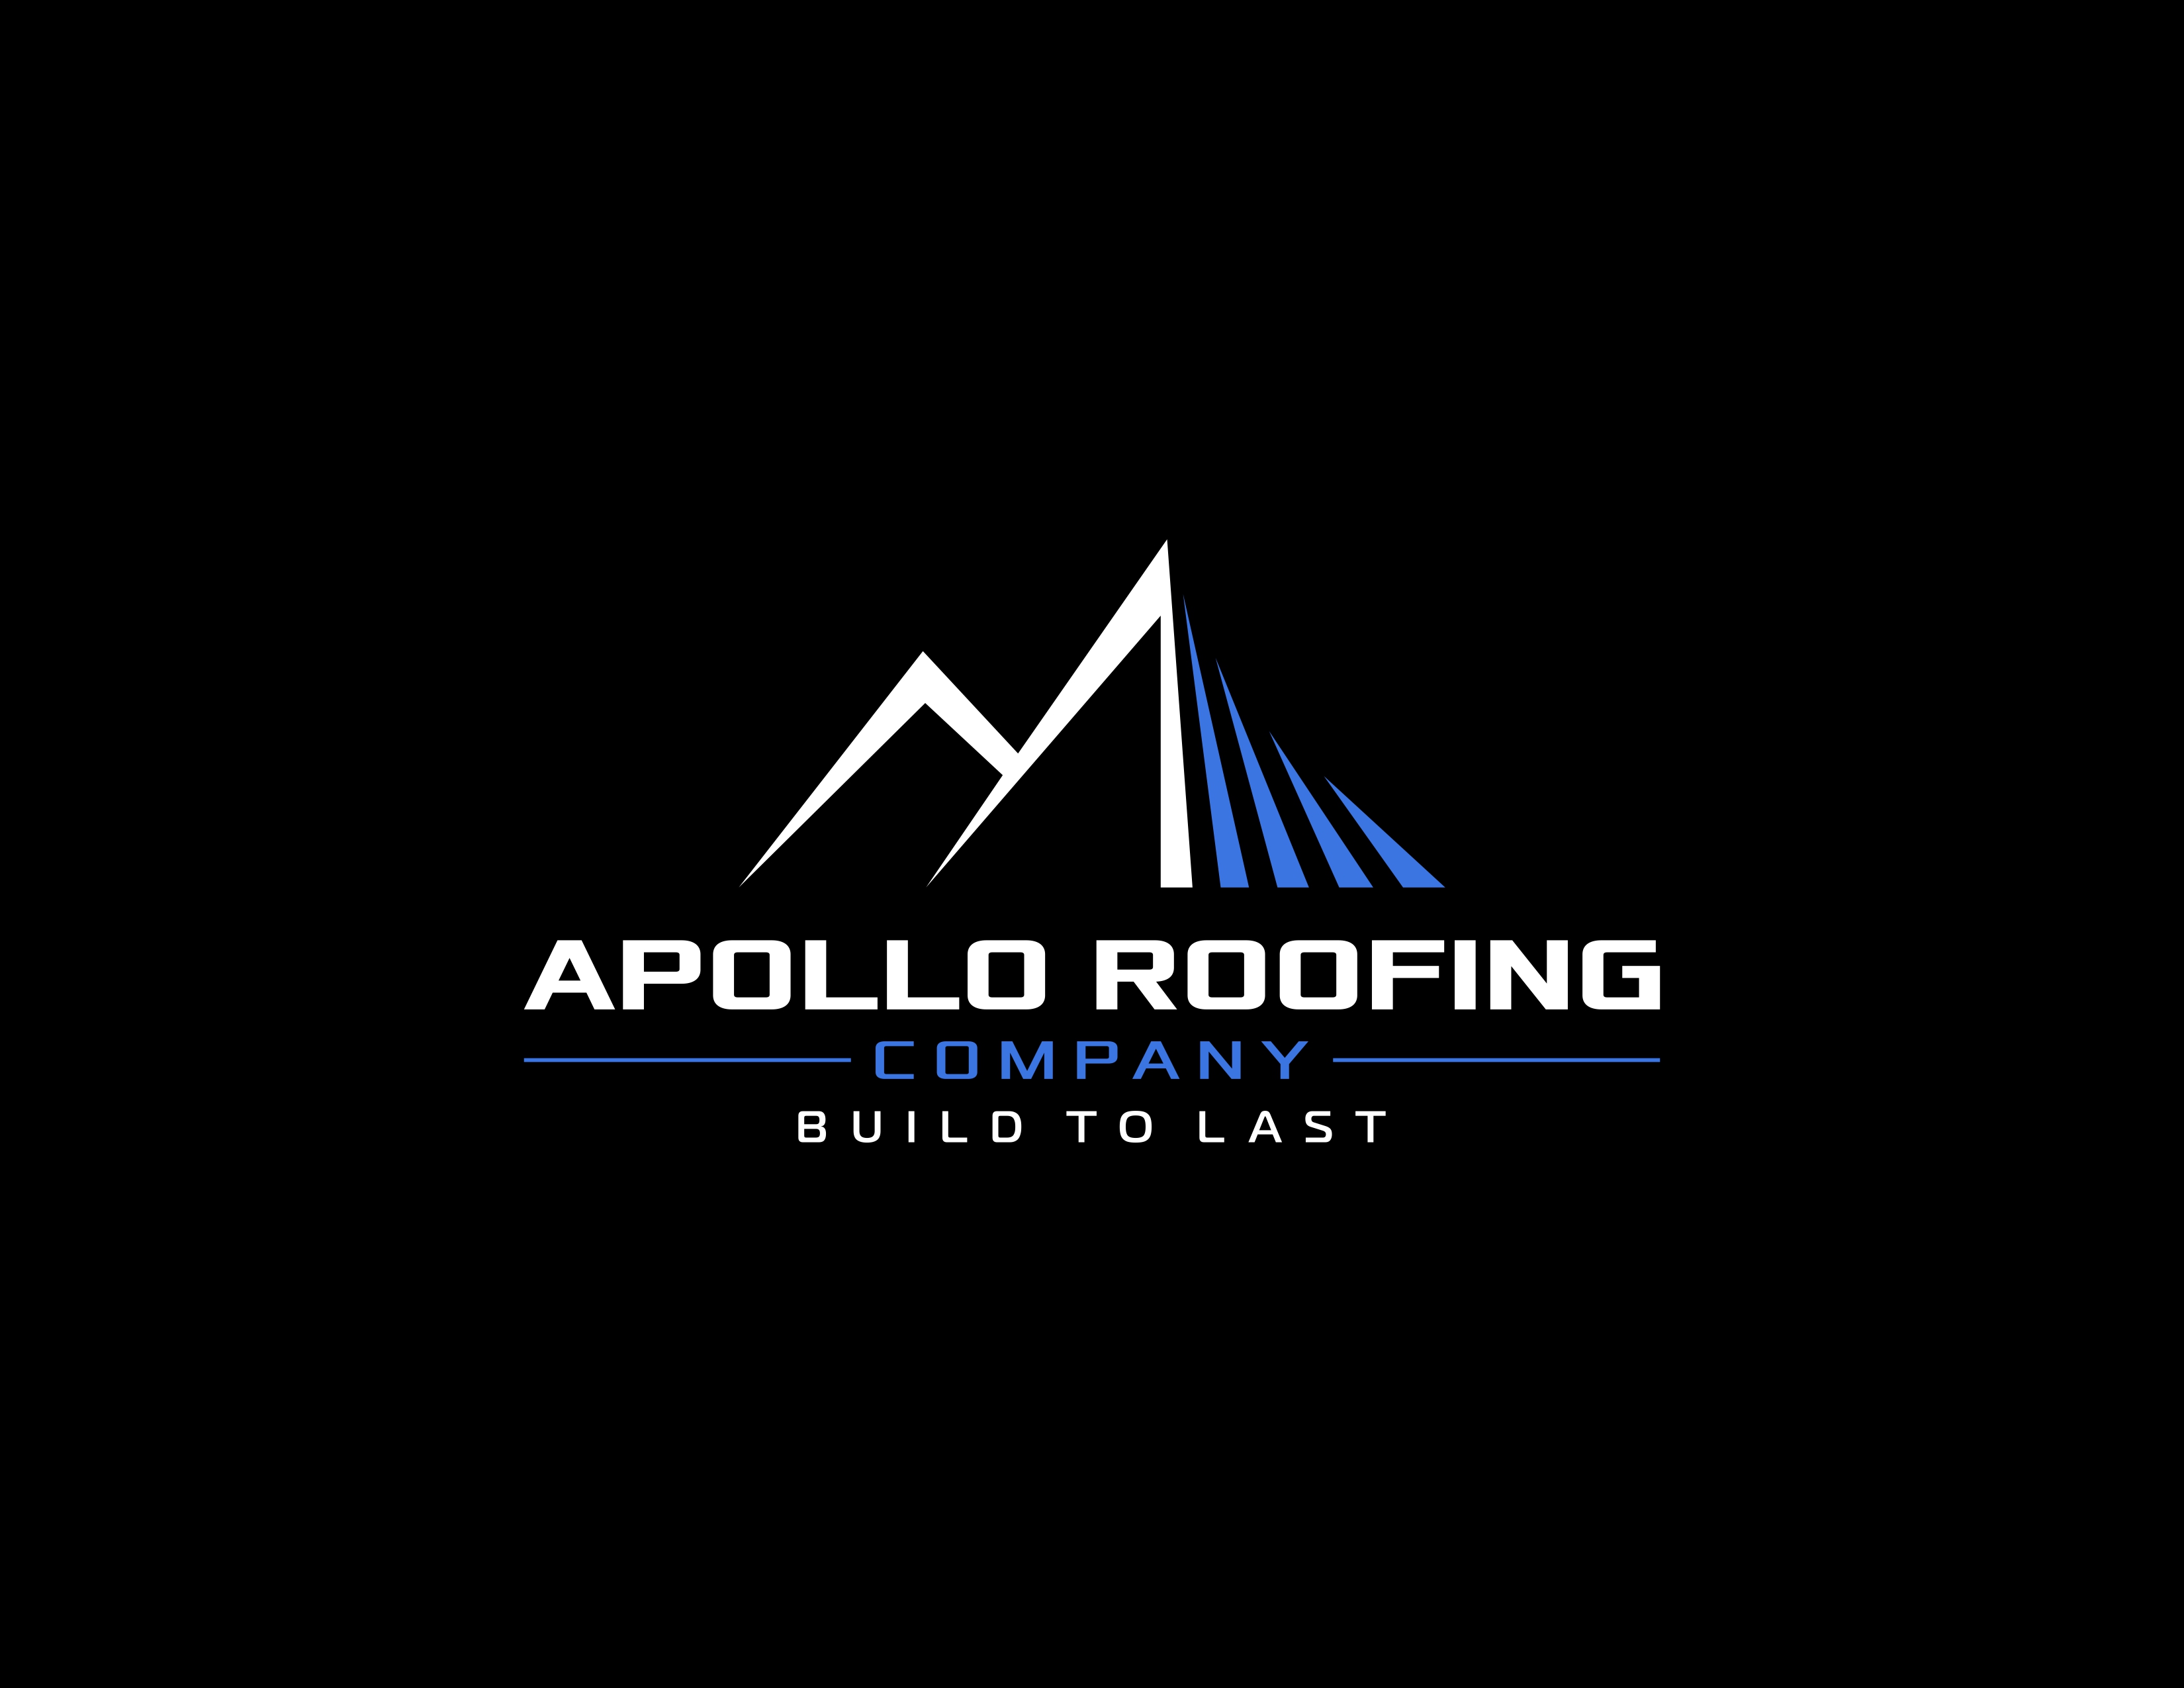 Apollo Roofing Company is the Go-To Roofing Repair Company in San Francisco